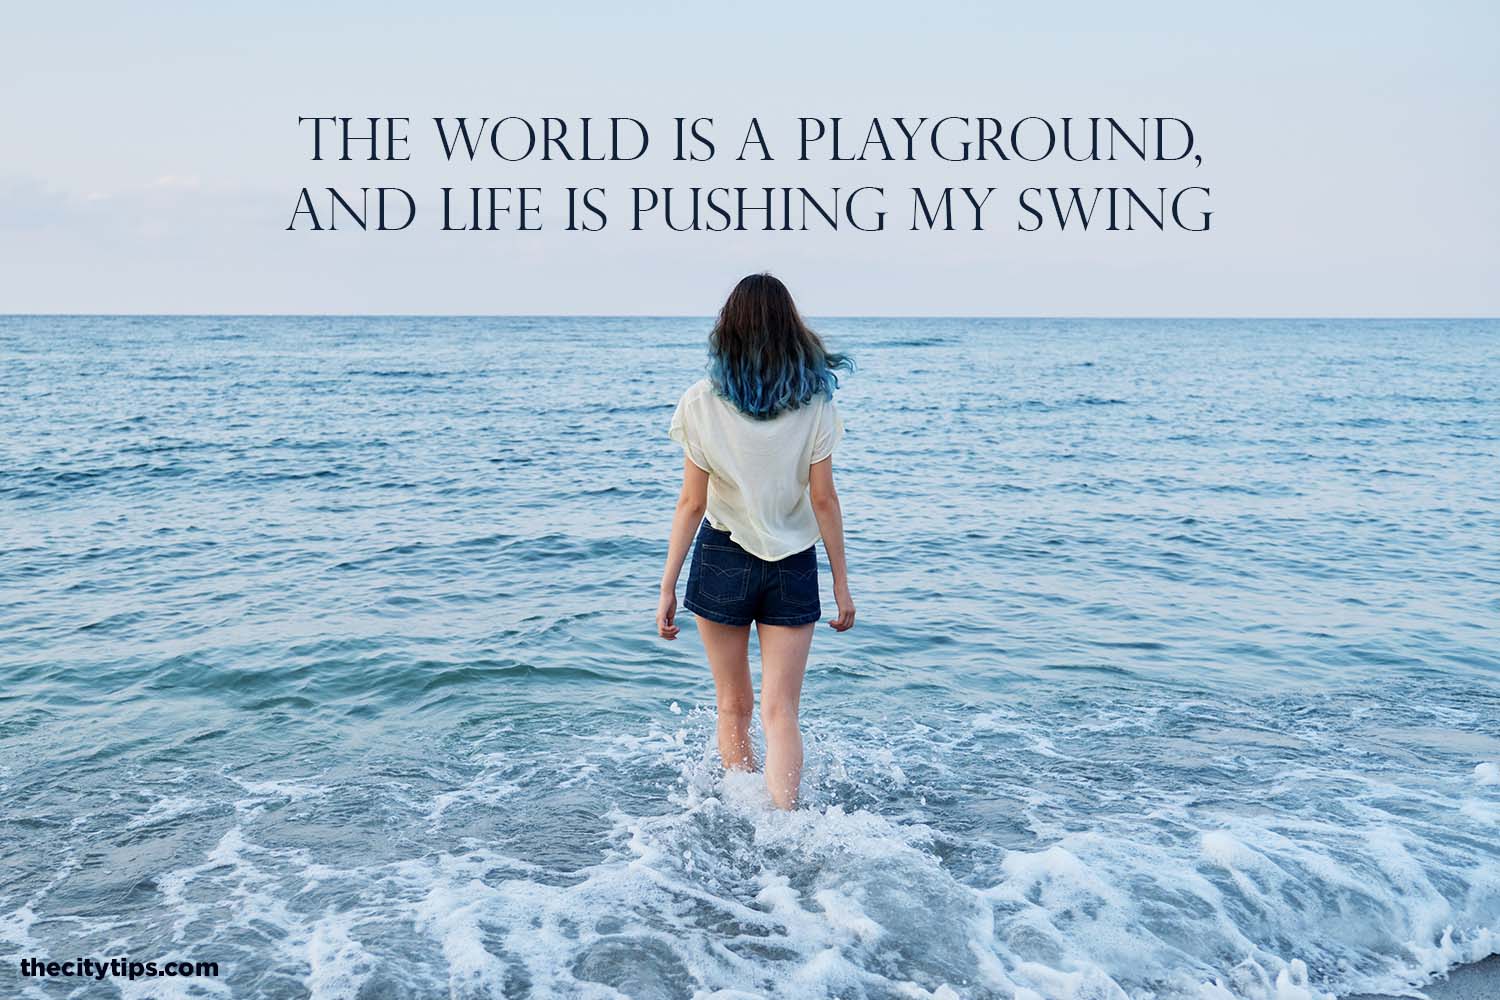 "The world is a playground, and life is pushing my swing." by Natalie Kocsis